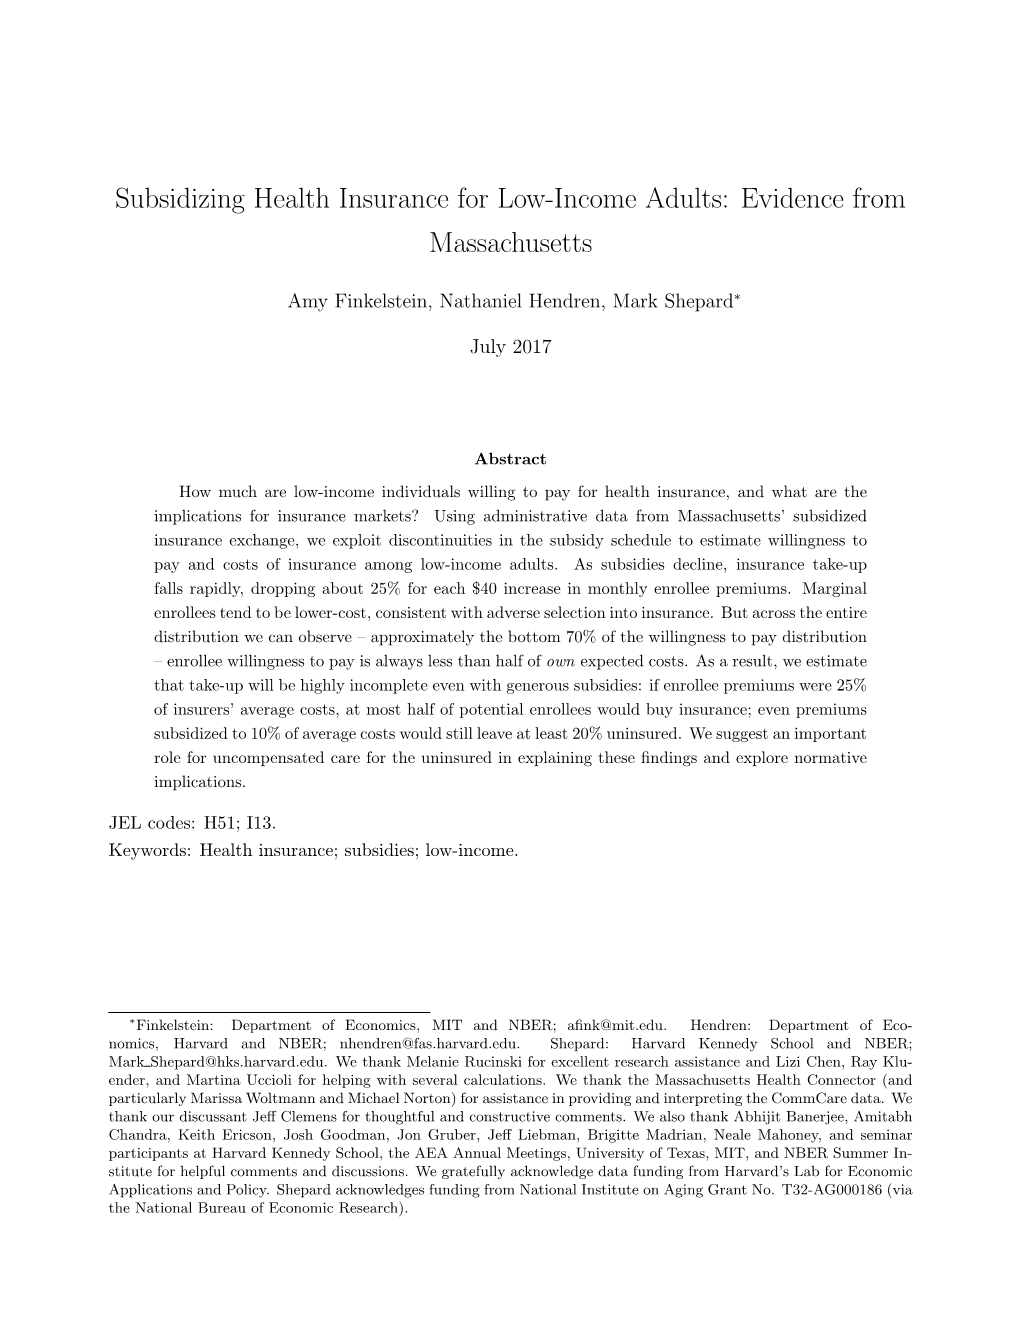 Subsidizing Health Insurance for Low-Income Adults: Evidence from Massachusetts